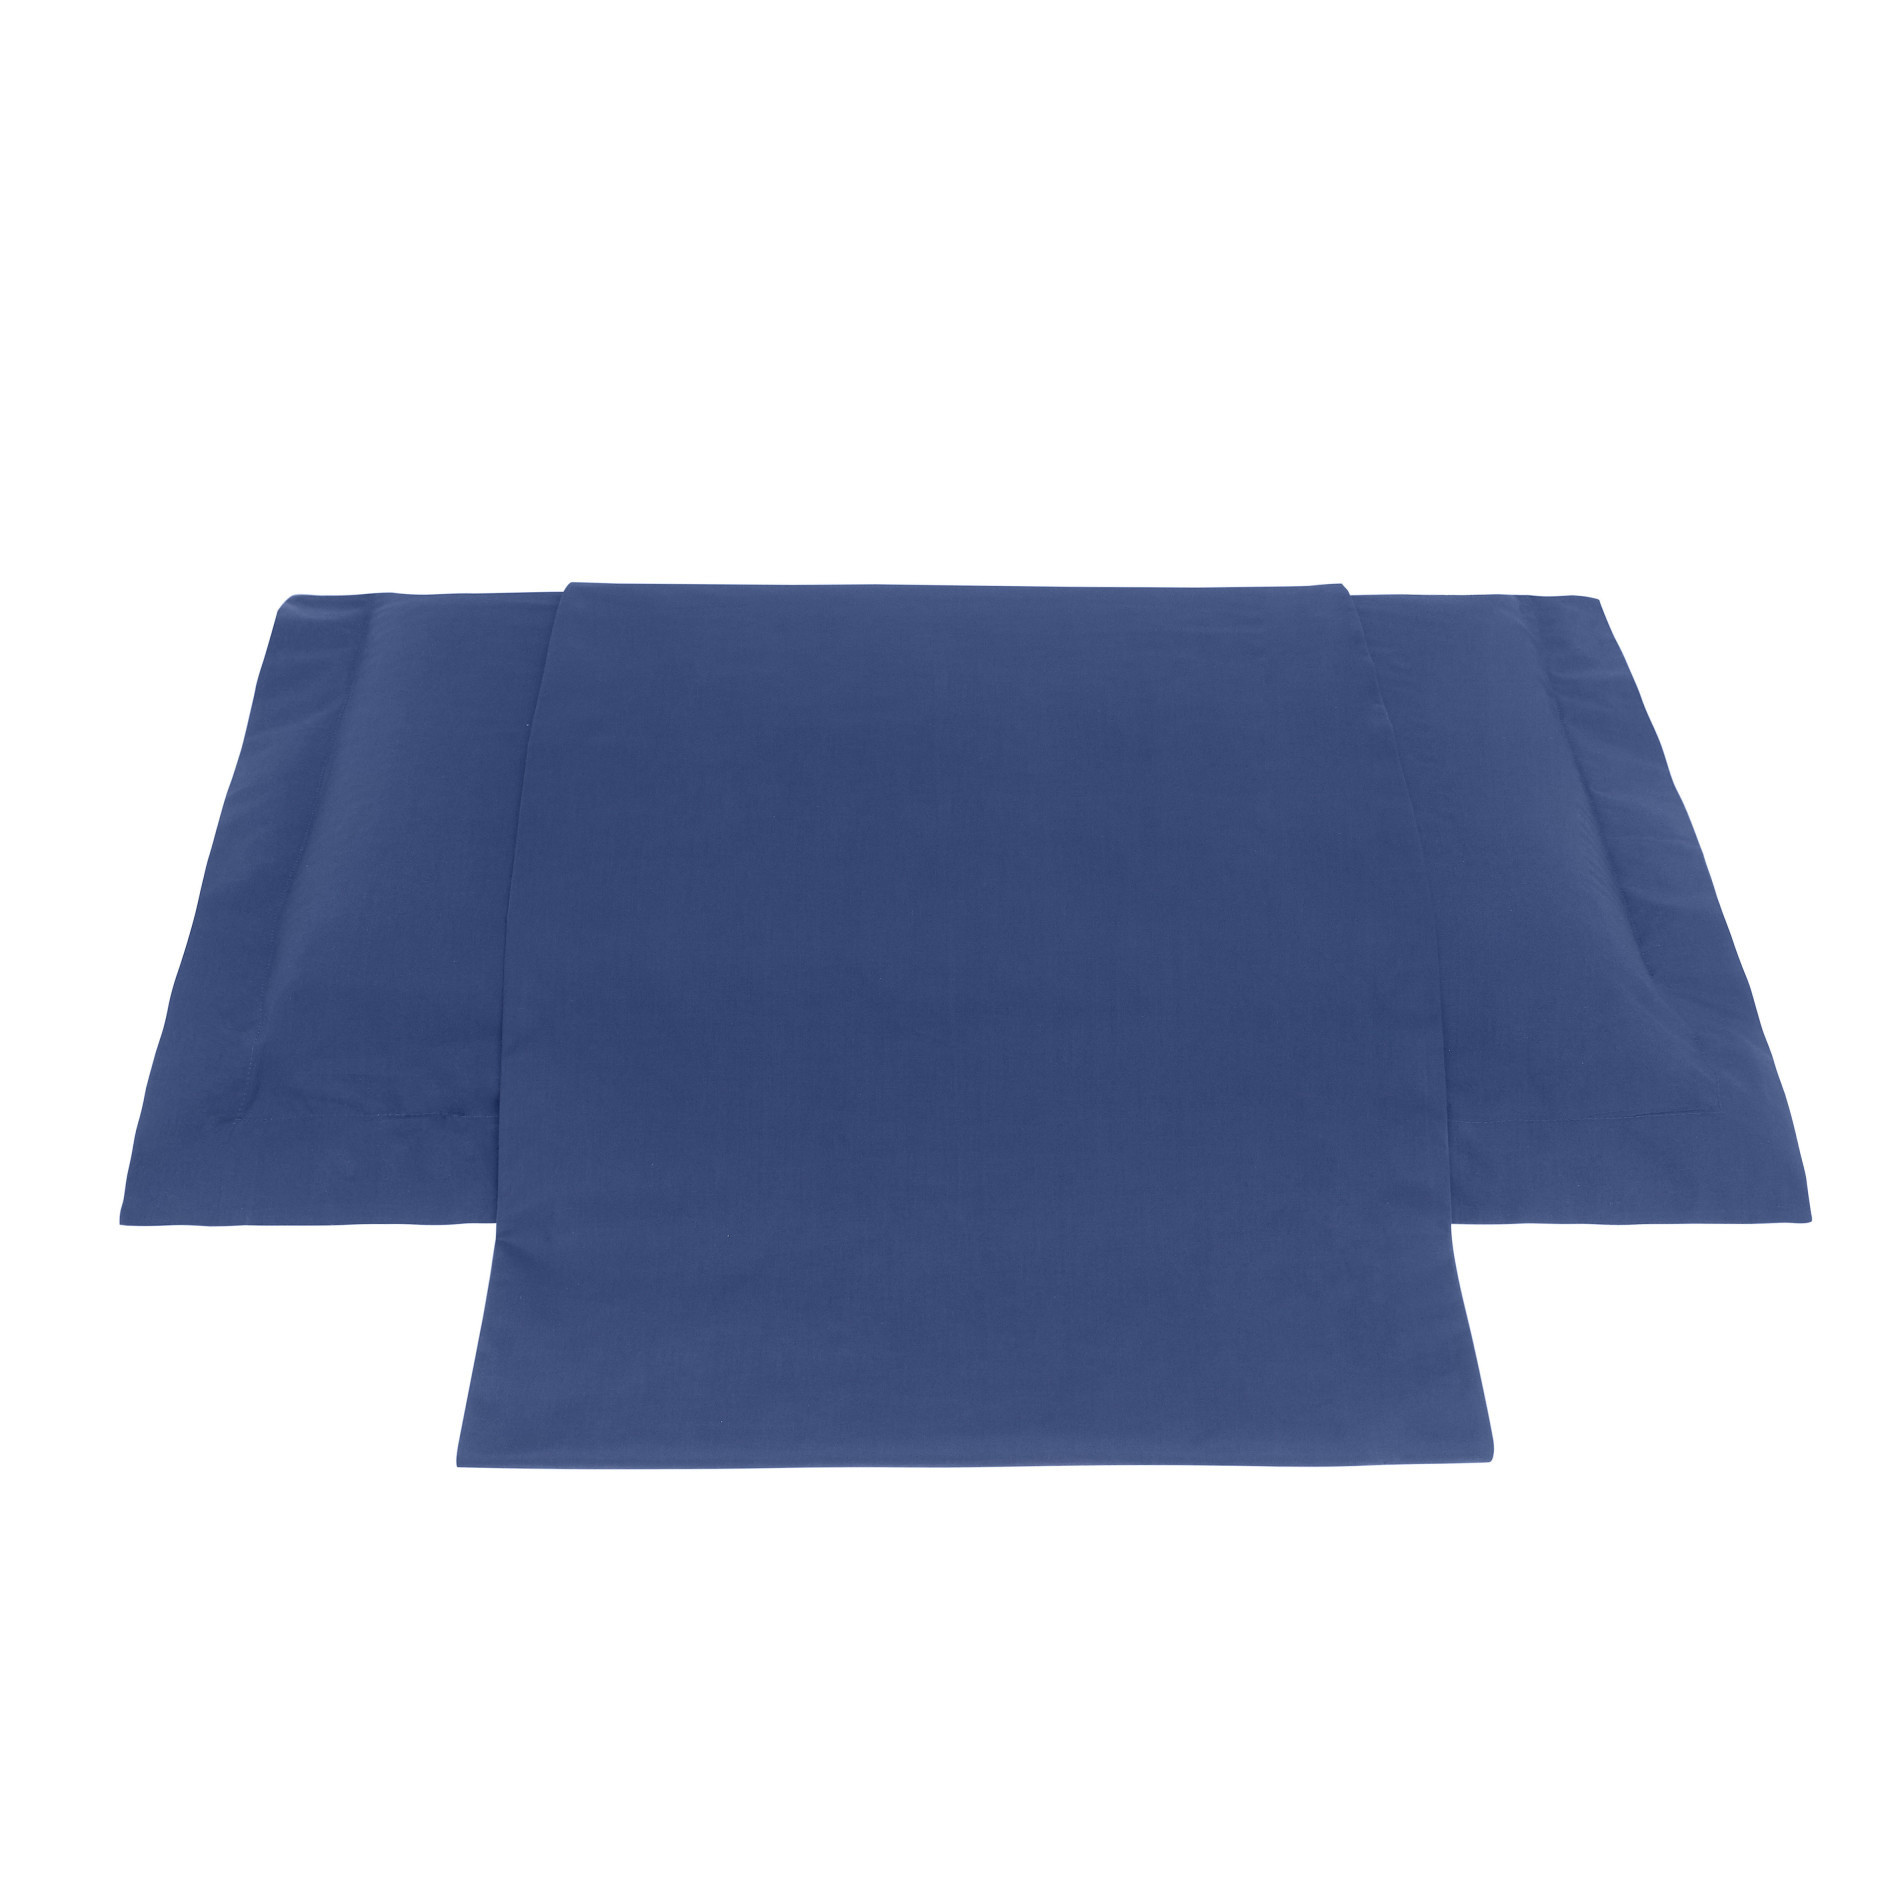 Zefiro solid cover duvet cover in percale., Blue, large image number 0